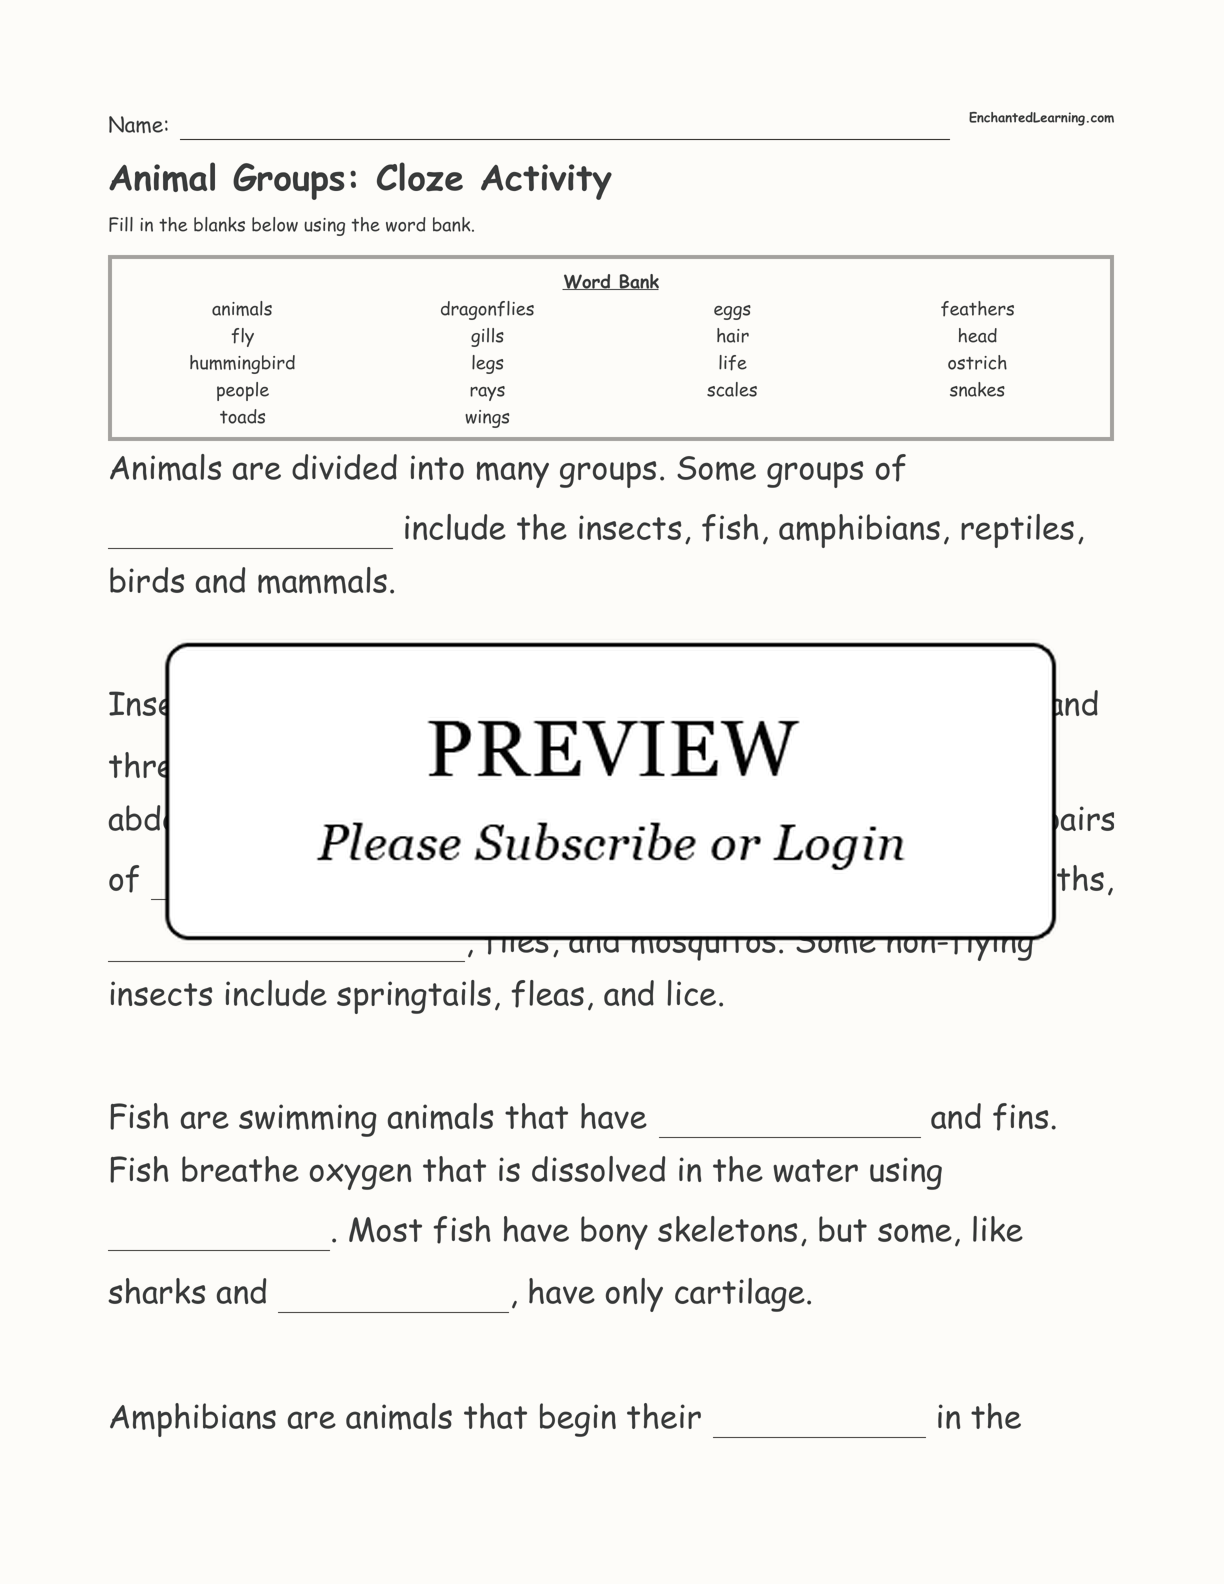 Animal Groups: Cloze Activity interactive worksheet page 1